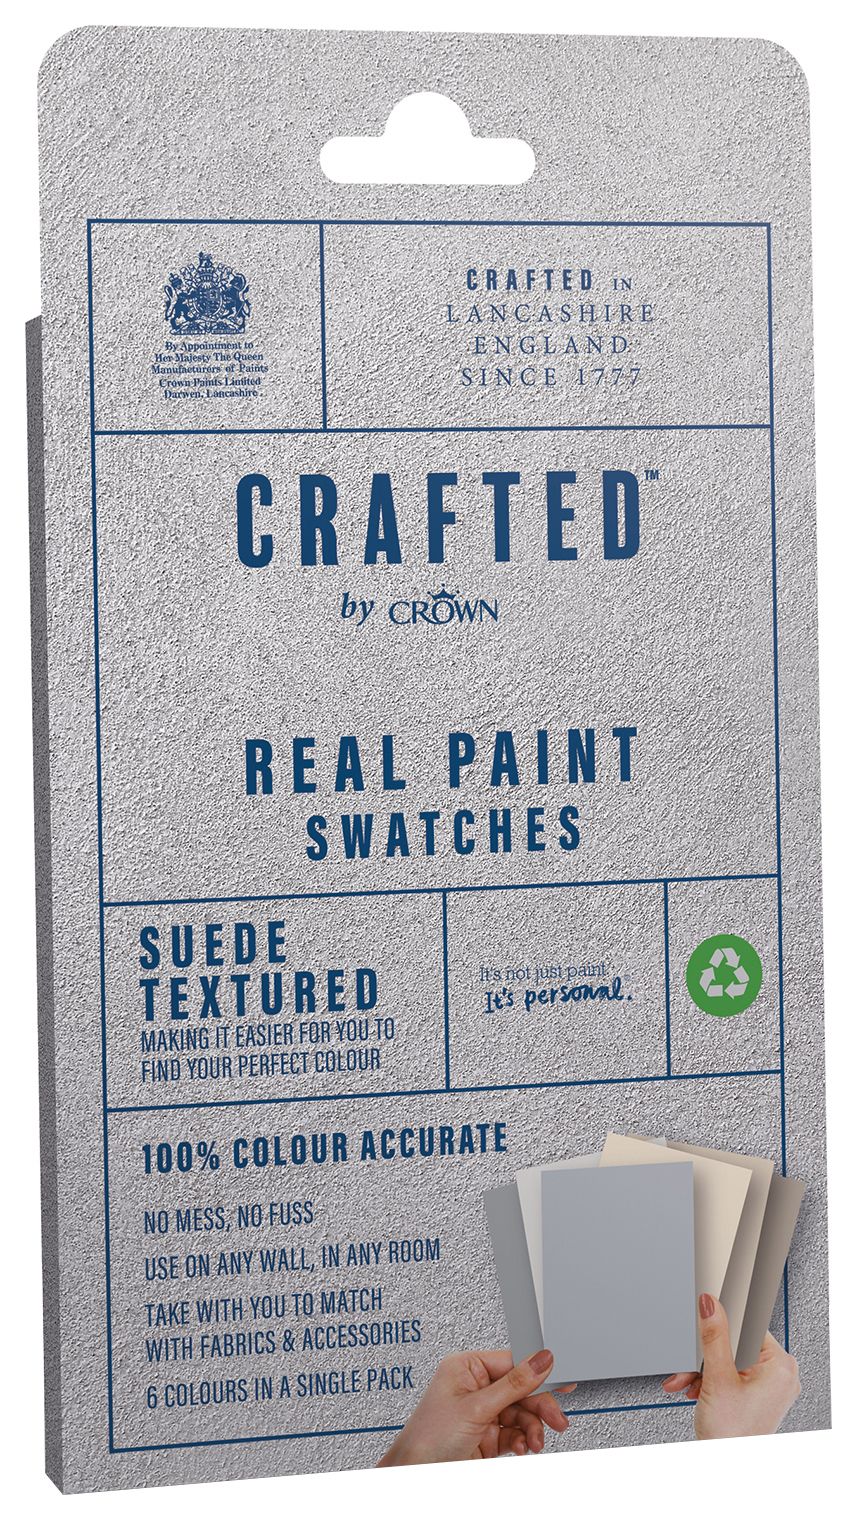 CRAFTED™ by Crown Flat Matt Real Paint Swatch - Subtle Textured - Pack of 6